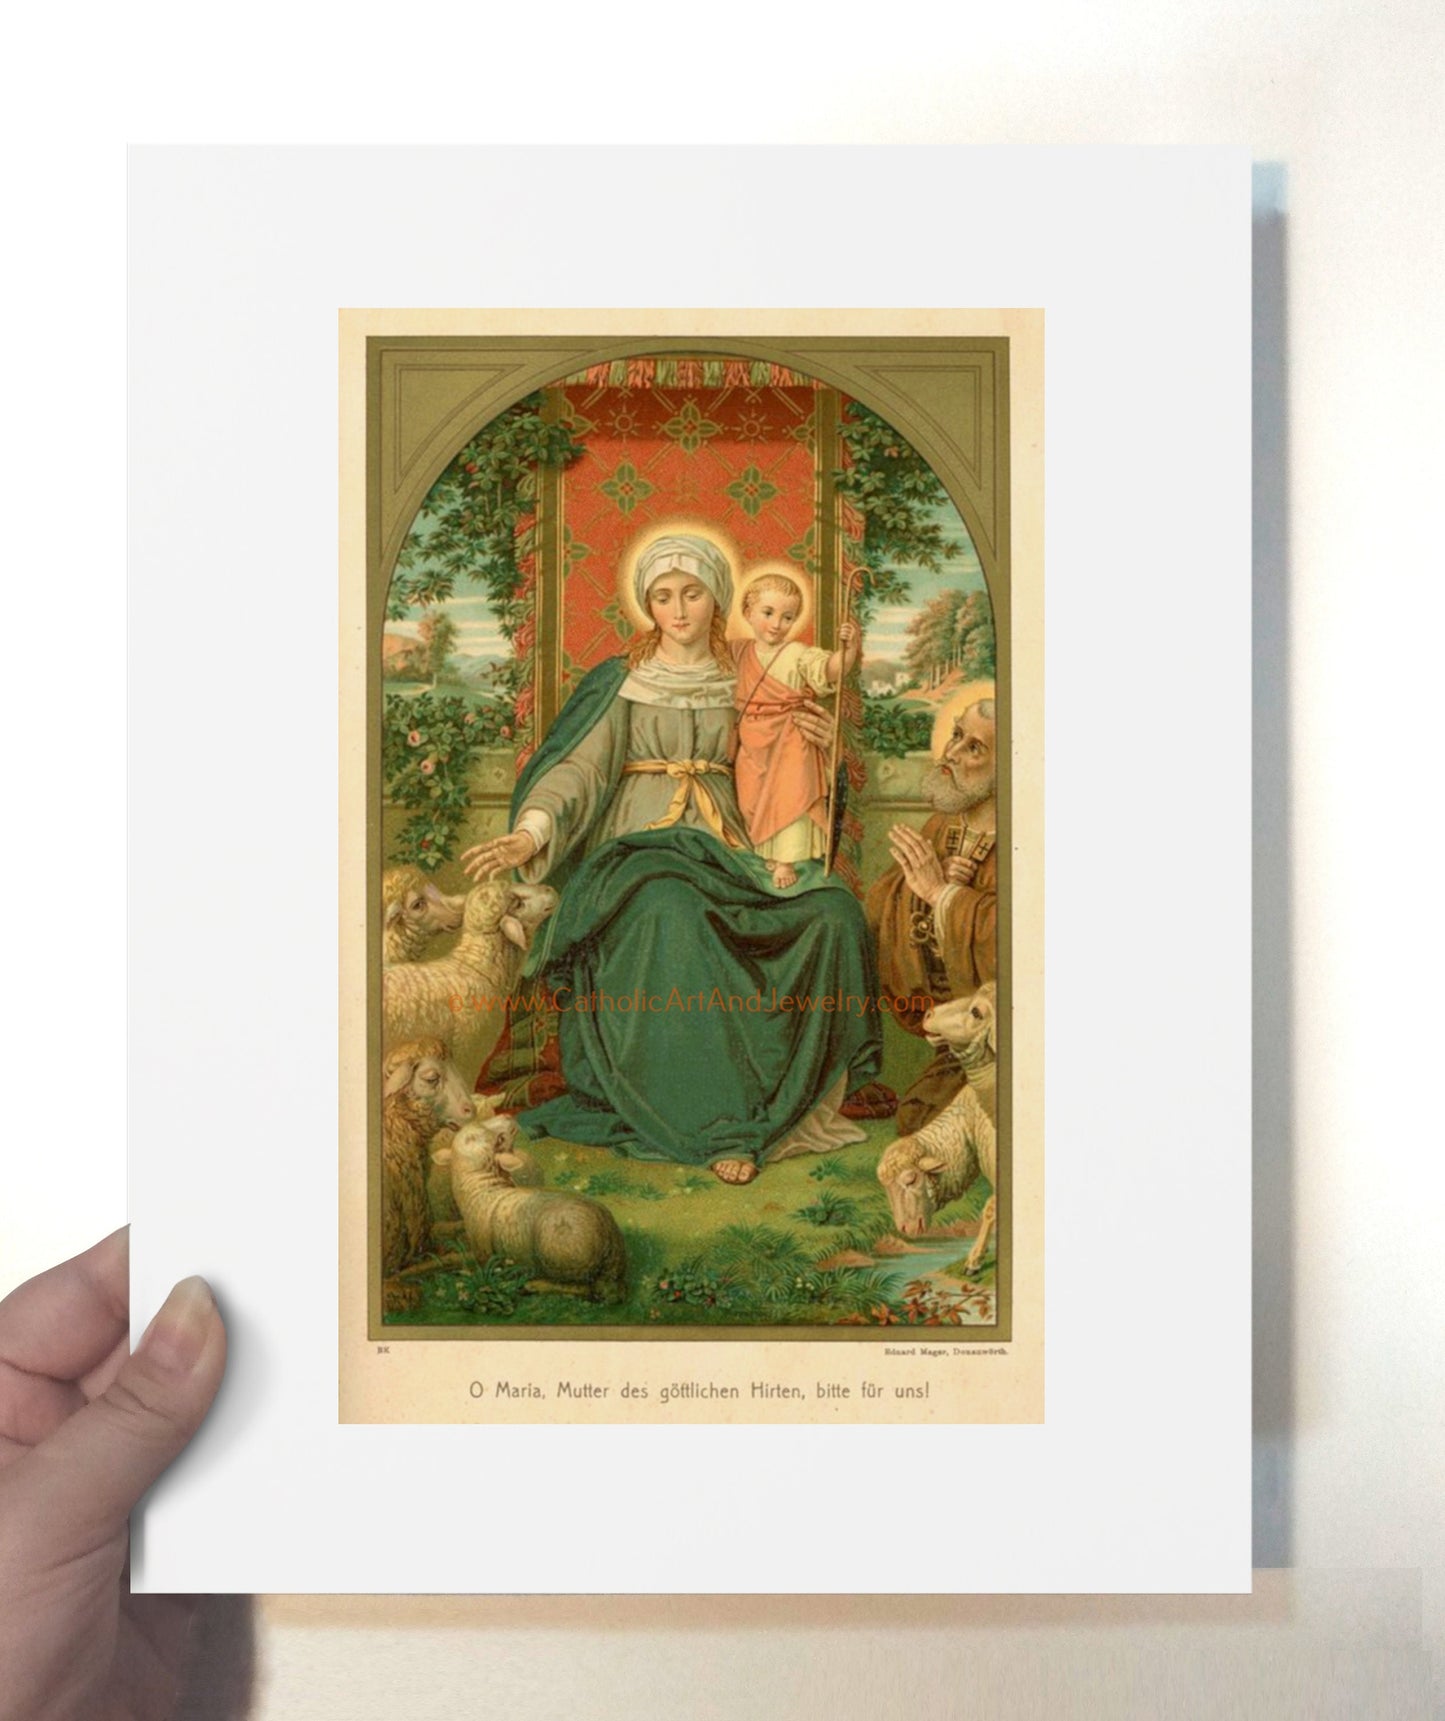 Mother of the Divine Shepherd – based on a Vintage Holy Card – Catholic Art Print – Archival Quality